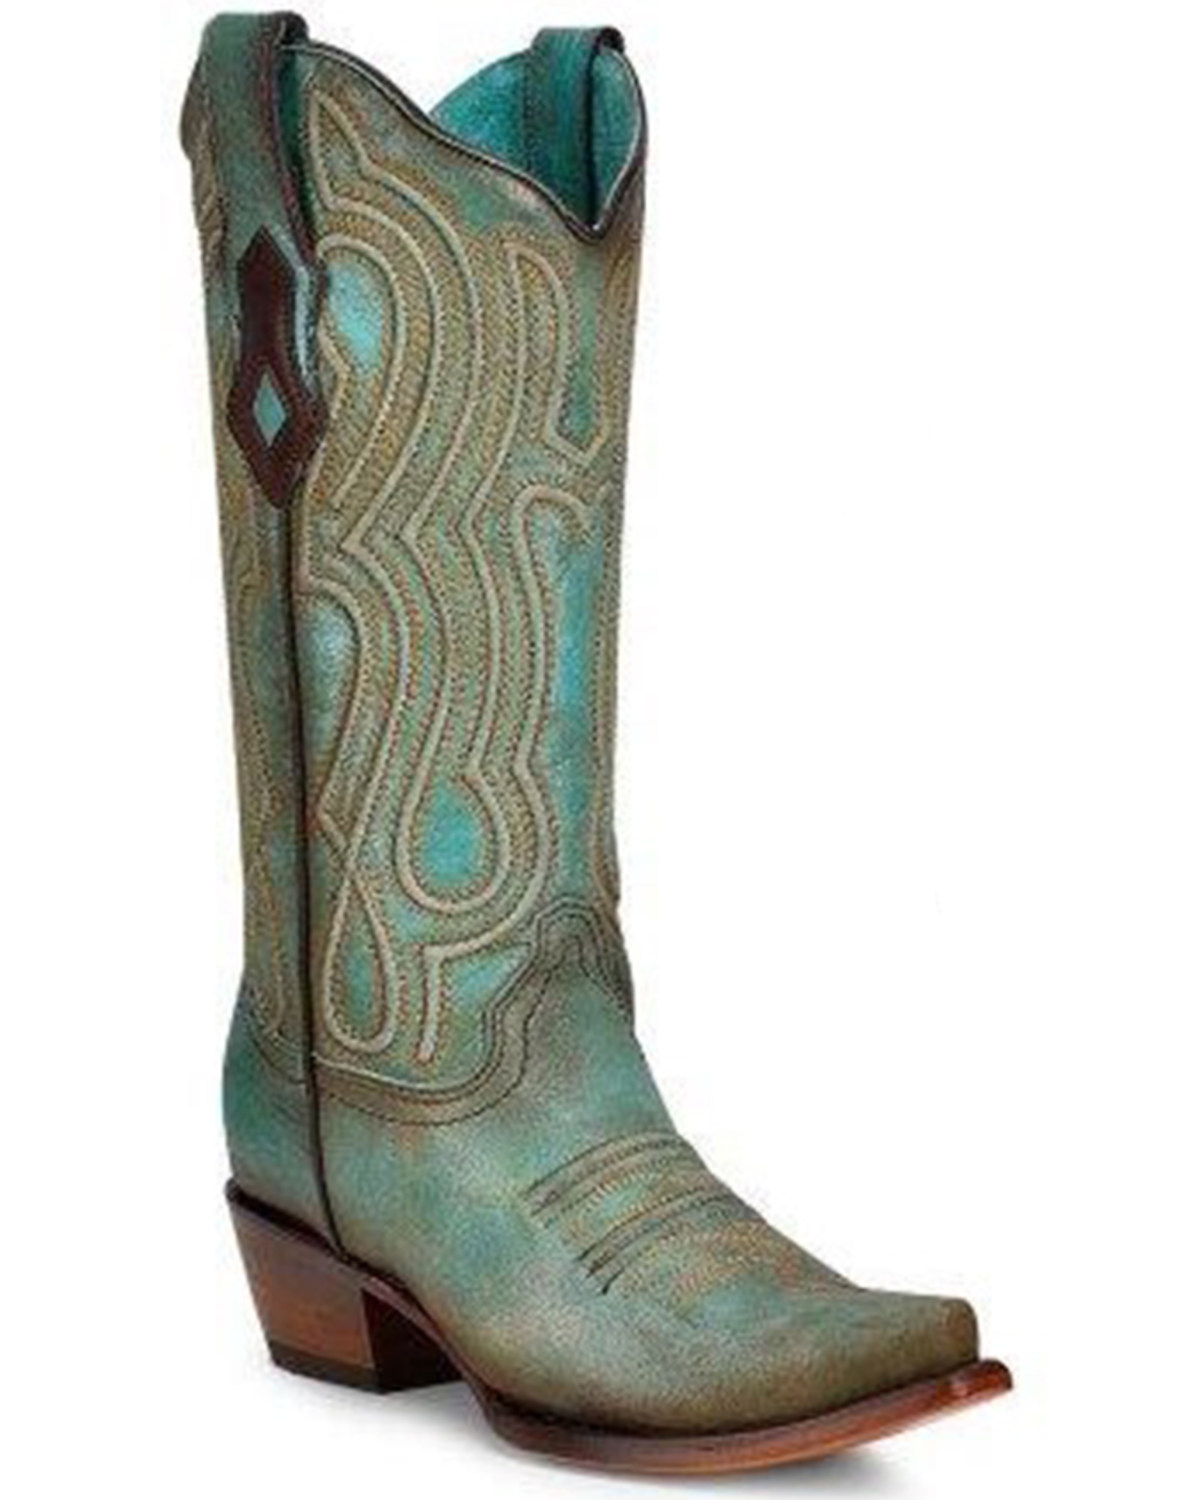 Corral Women's Embroidered Western Boots - Snip Toe